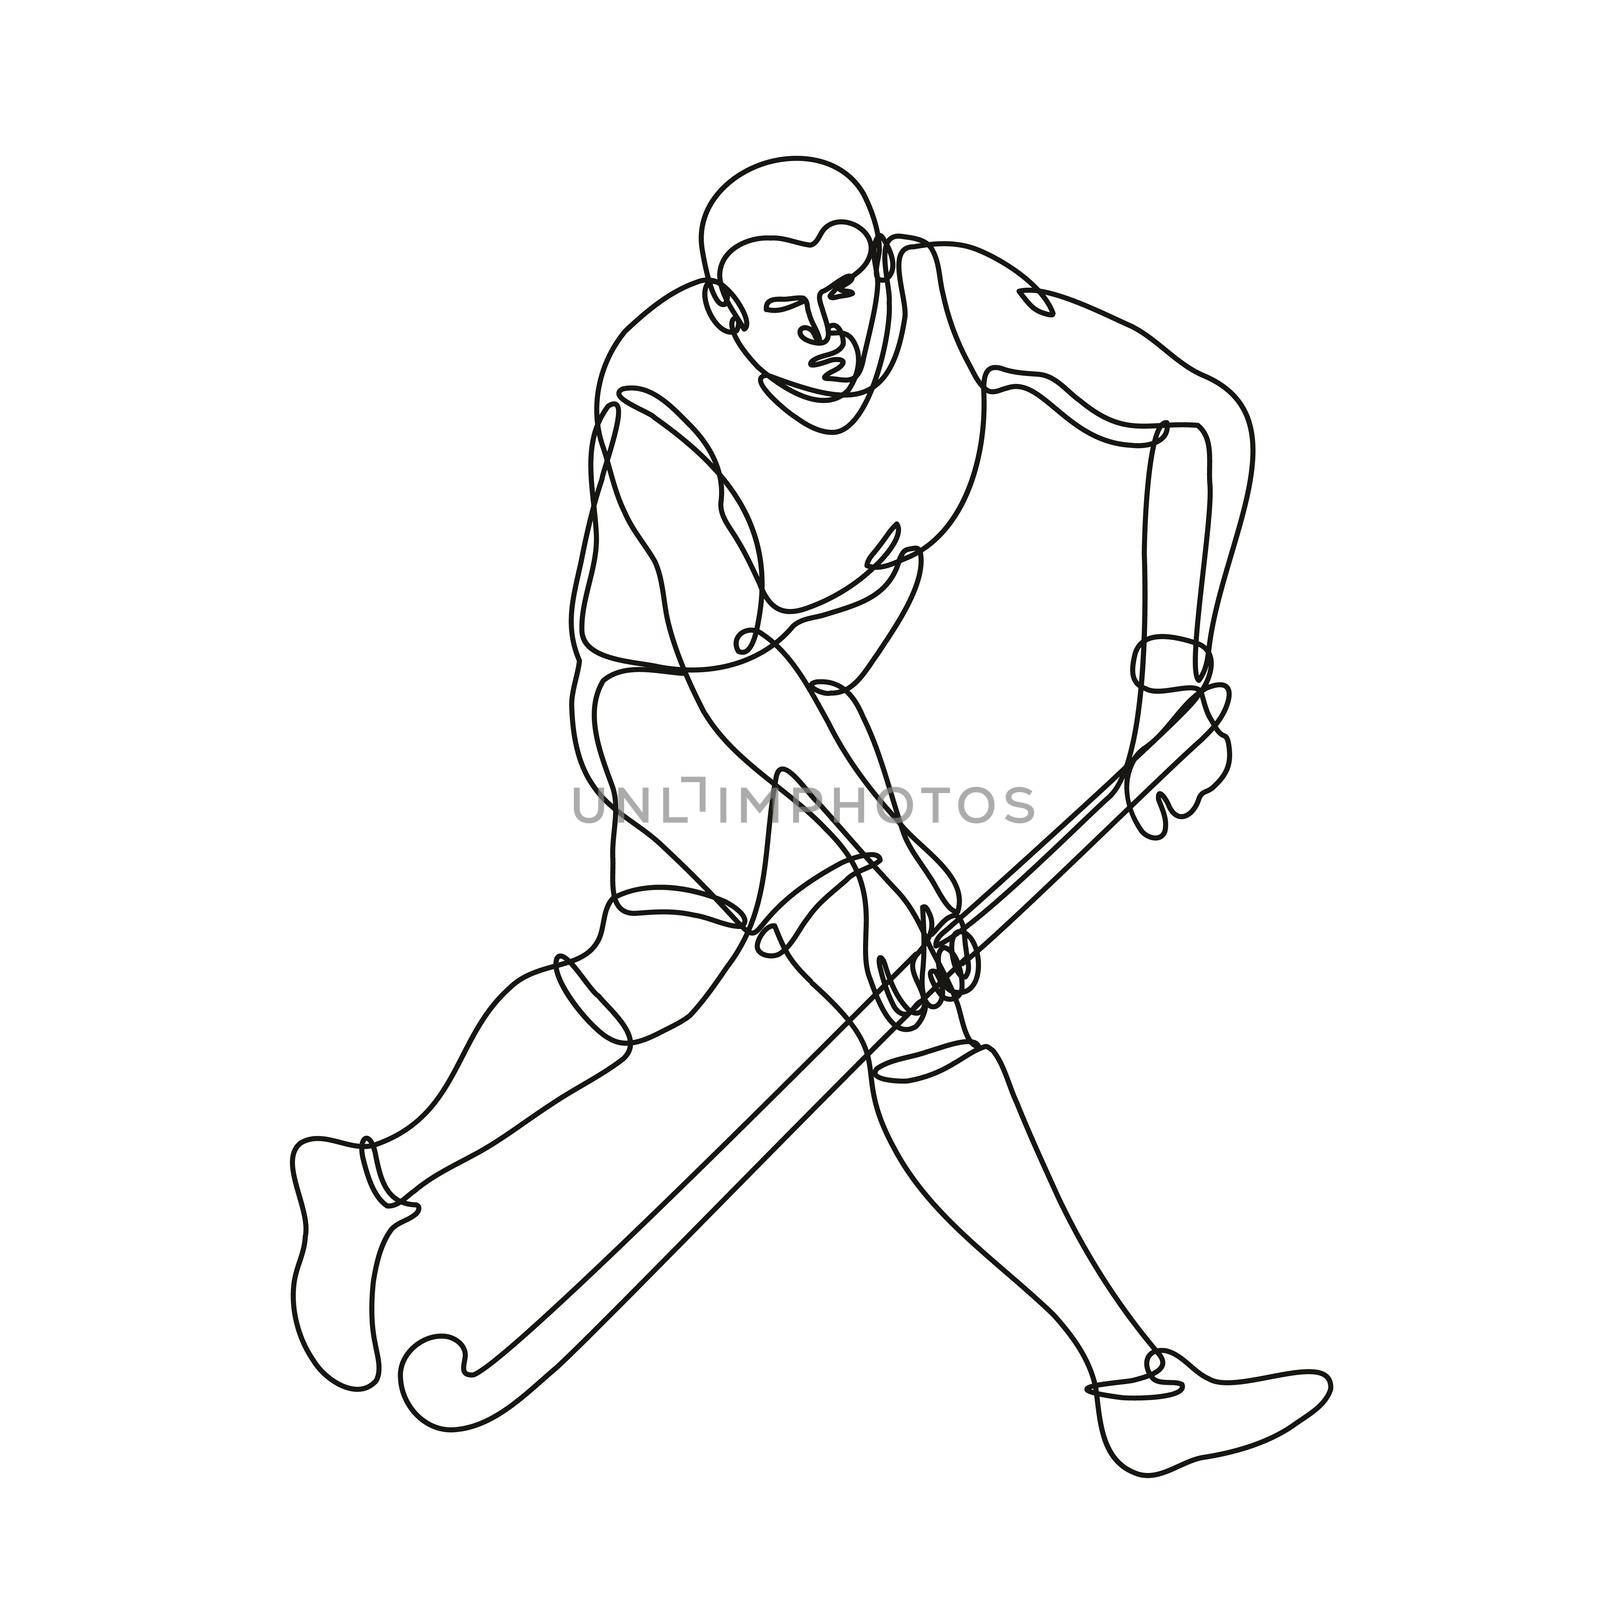 Continuous line drawing illustration of a field hockey running with hockey stick done in mono line or doodle style in black and white on isolated background. 